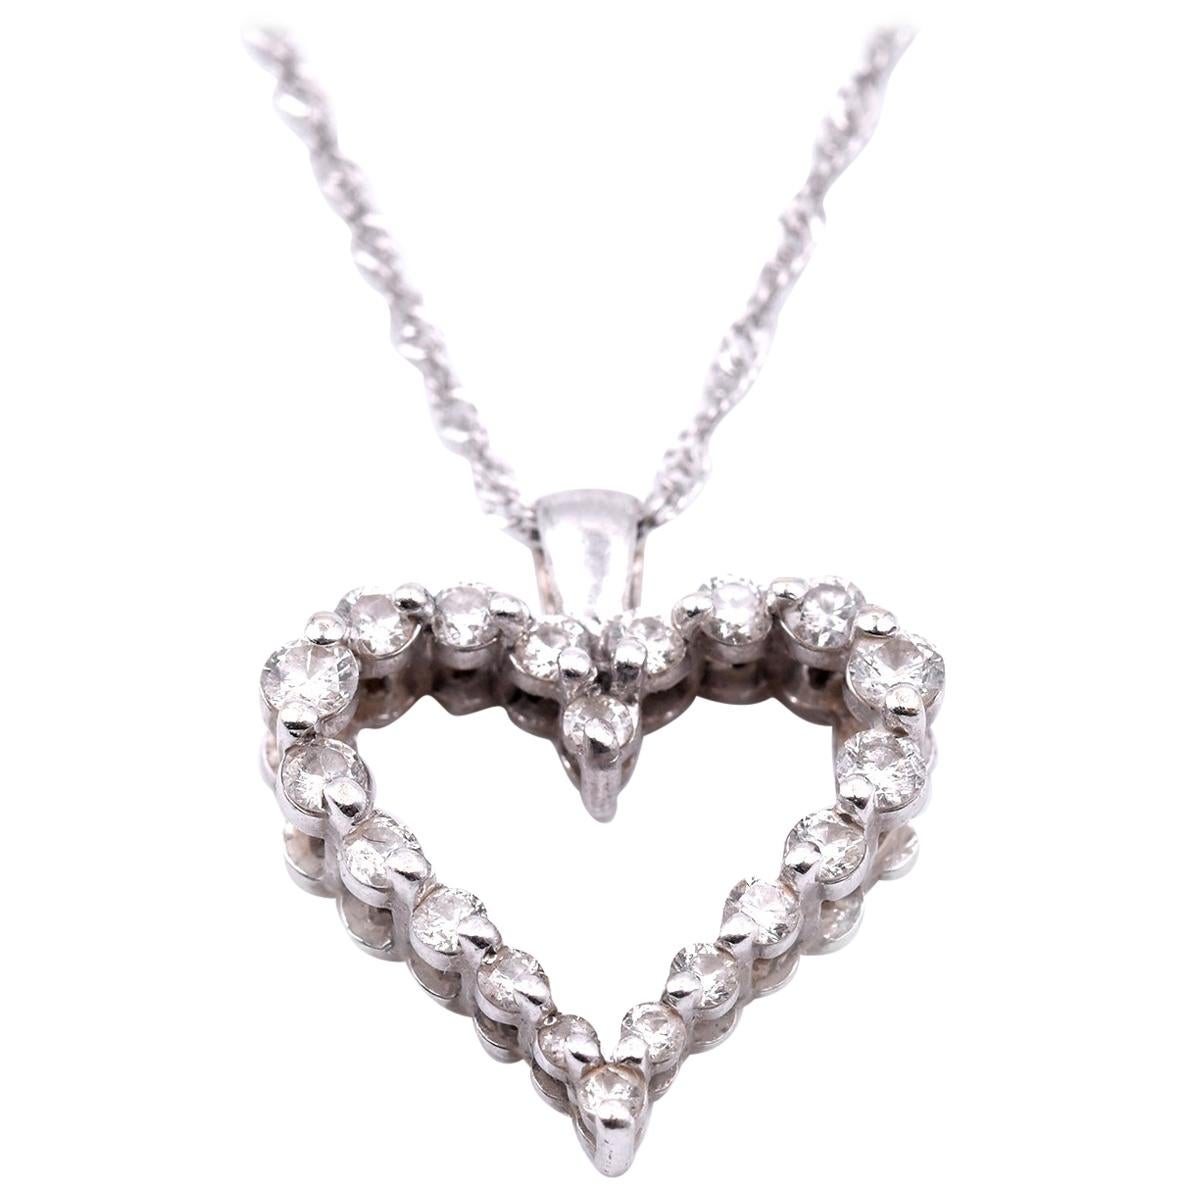 14-karat-white-gold-heart-with-diamond-necklace-for-sale-at-1stdibs